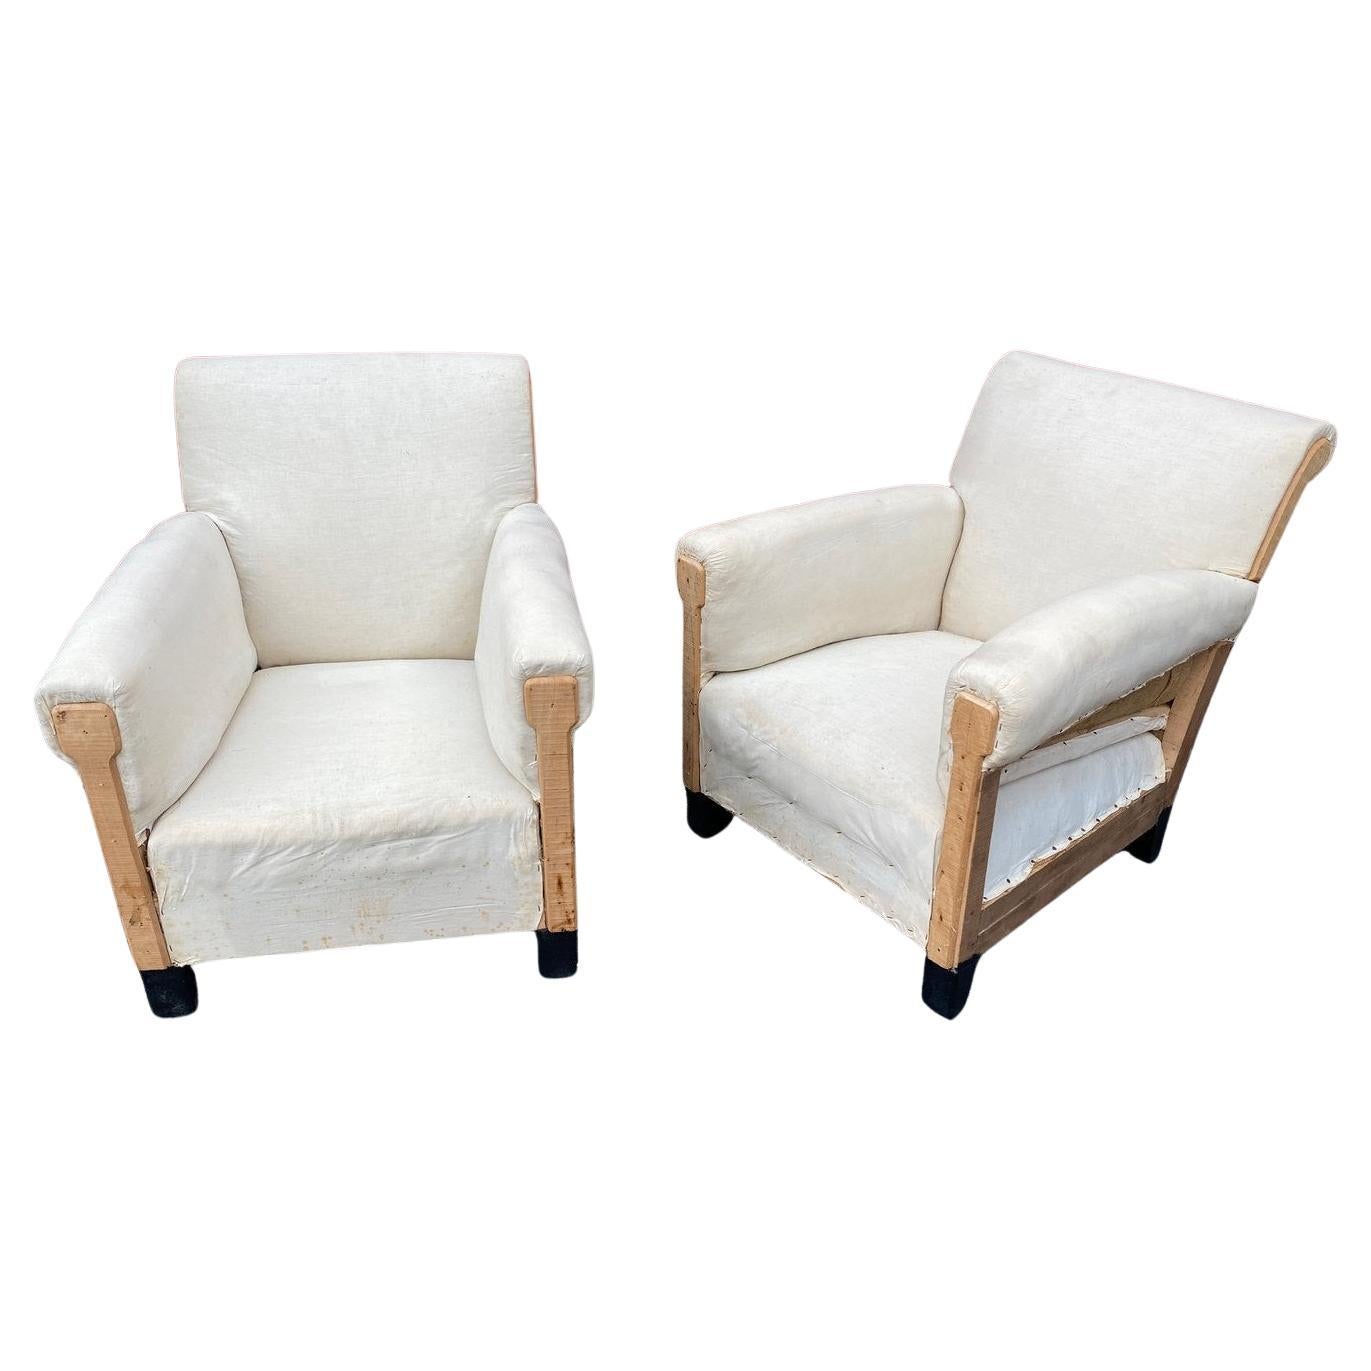 Pair of Small Scale 1950s French Mid Century Modern Club Chairs in Muslin